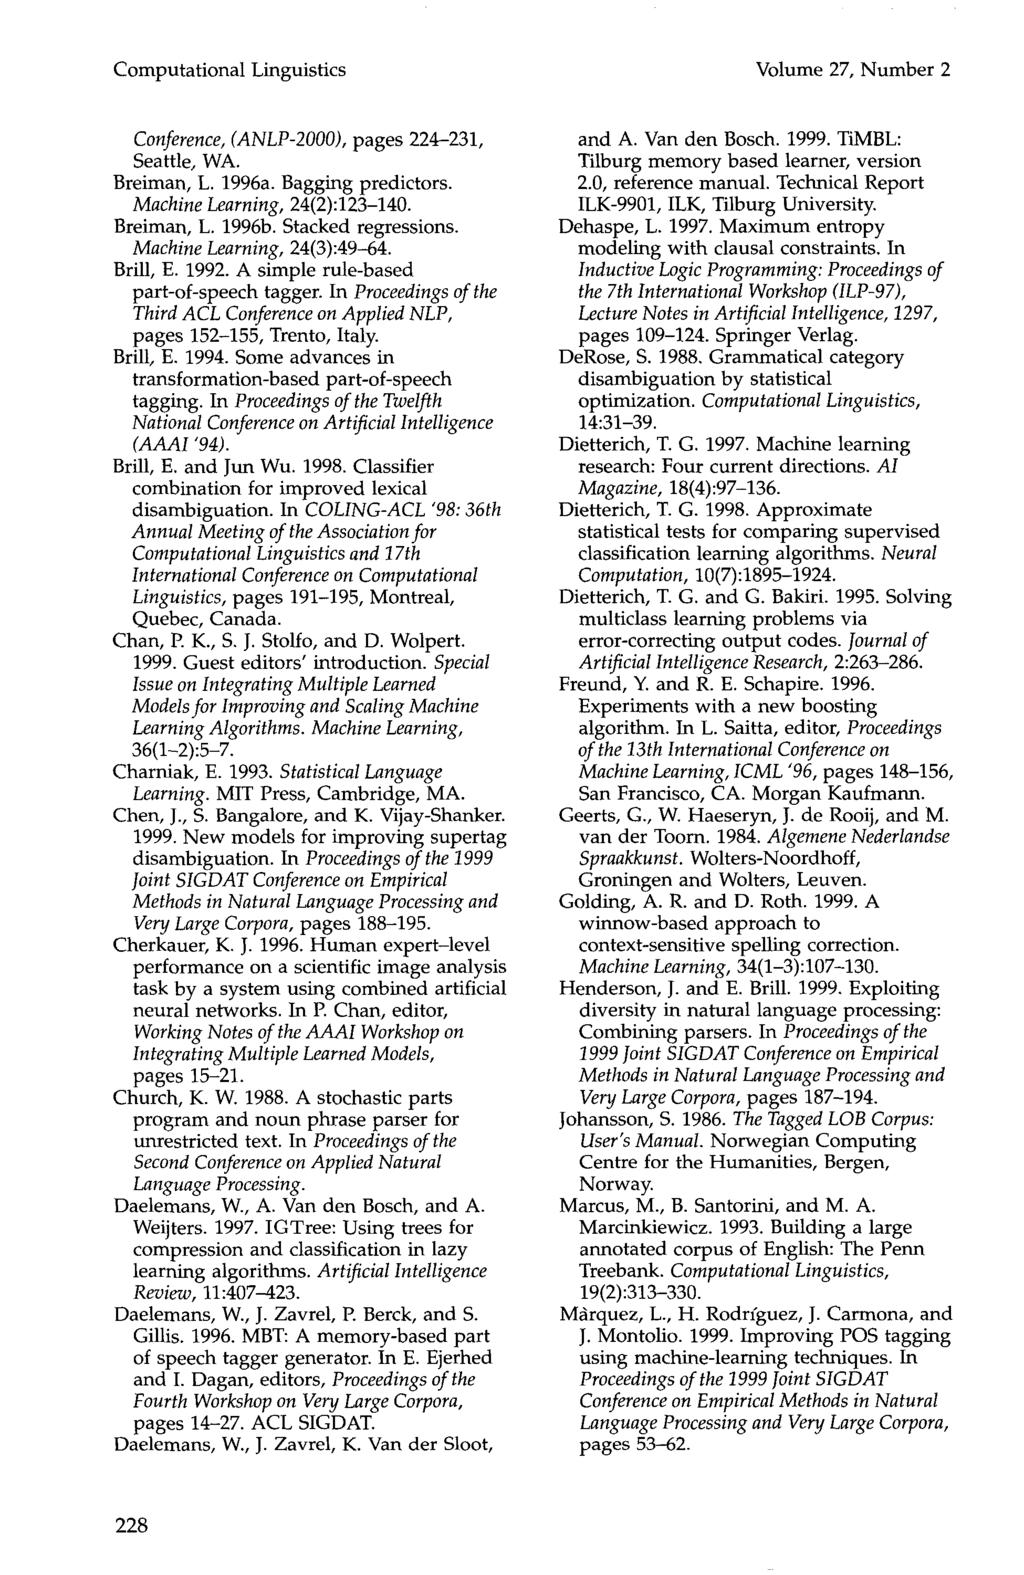 Computational Linguistics Volume 27, Number 2 Conference, (ANLP-2000), pages 224-231, Seattle, WA. Breiman, L. 1996a. Bagging predictors. Machine Learning, 24(2):123-140. Breiman, L. 1996b.